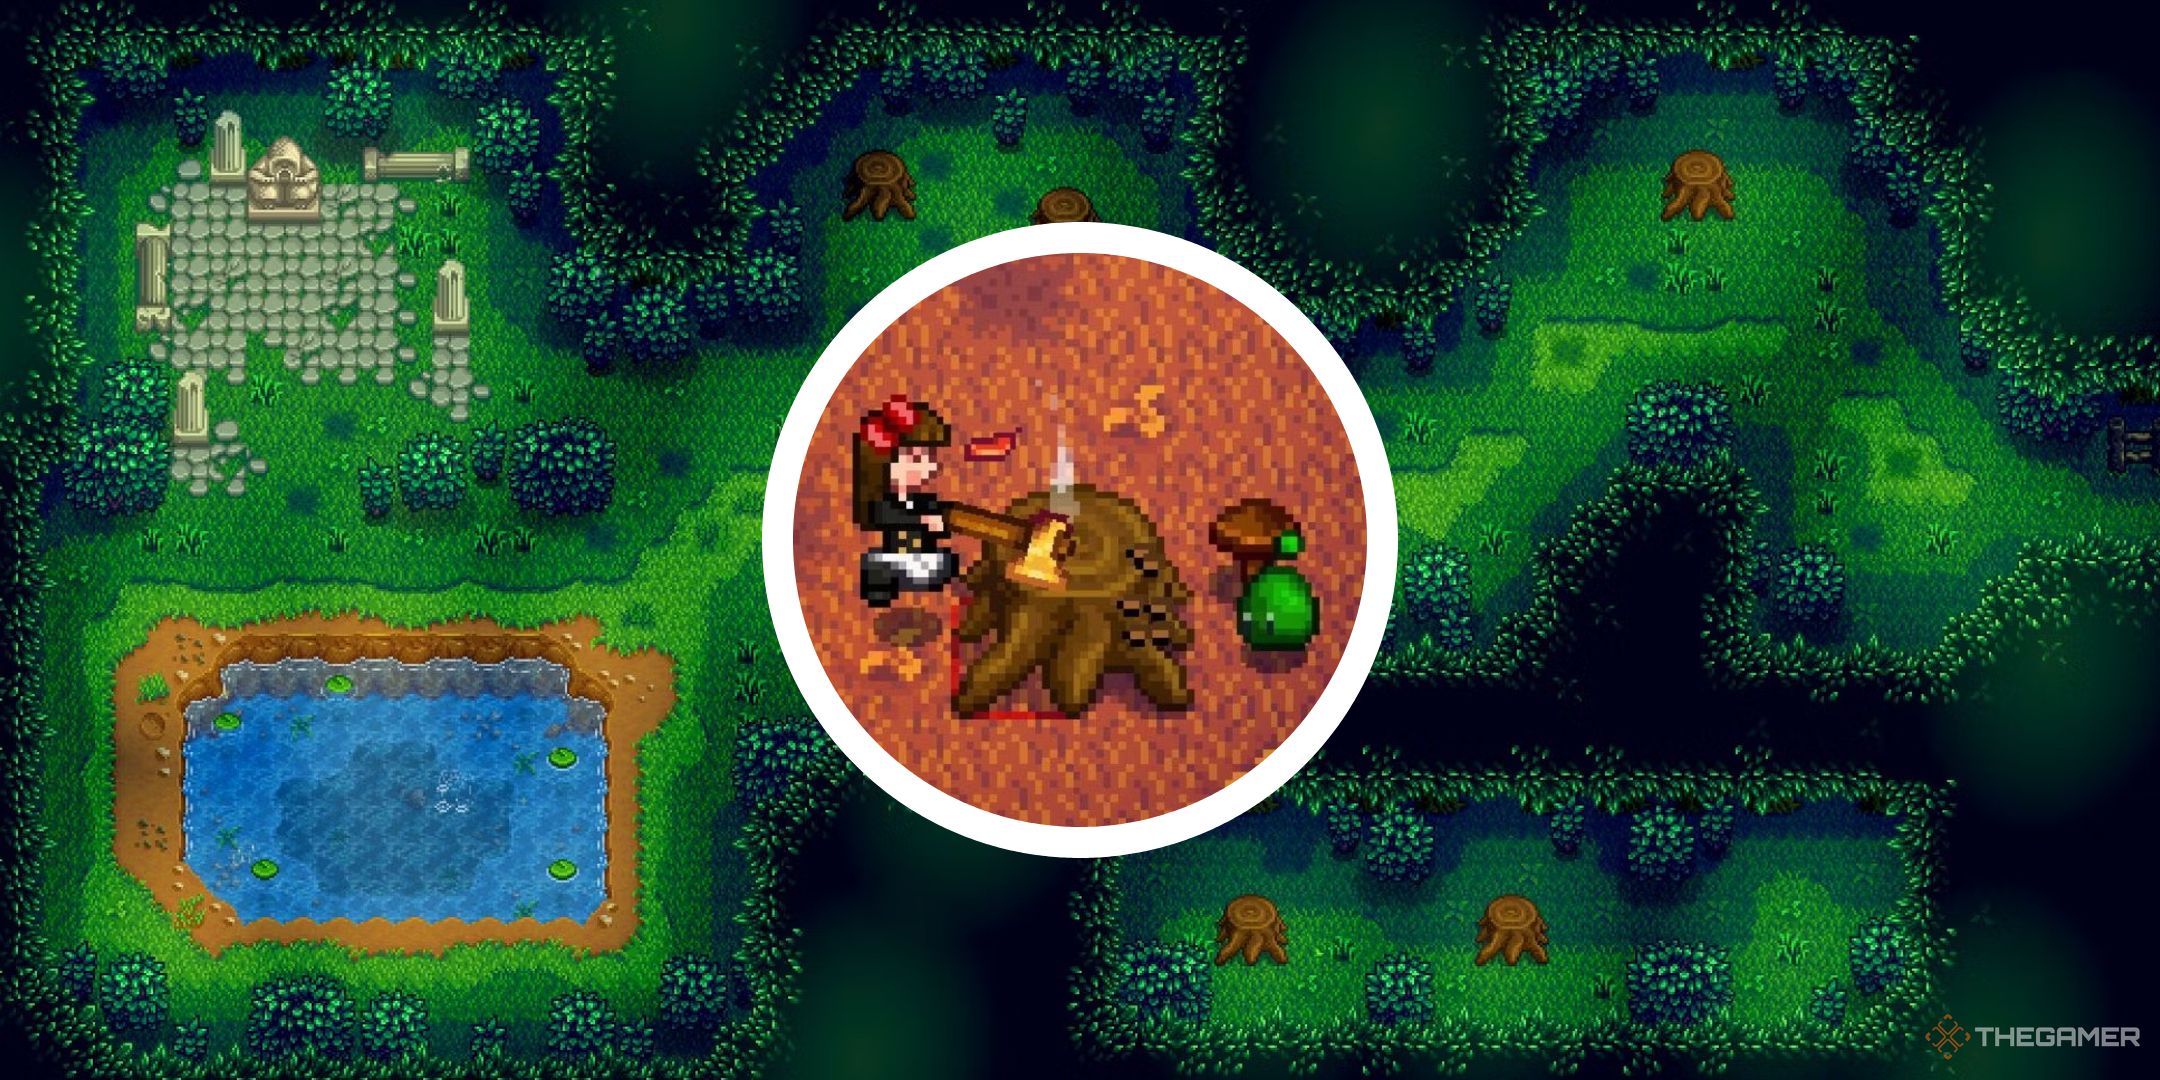 stardew valley image of secret woods with player chopping stump